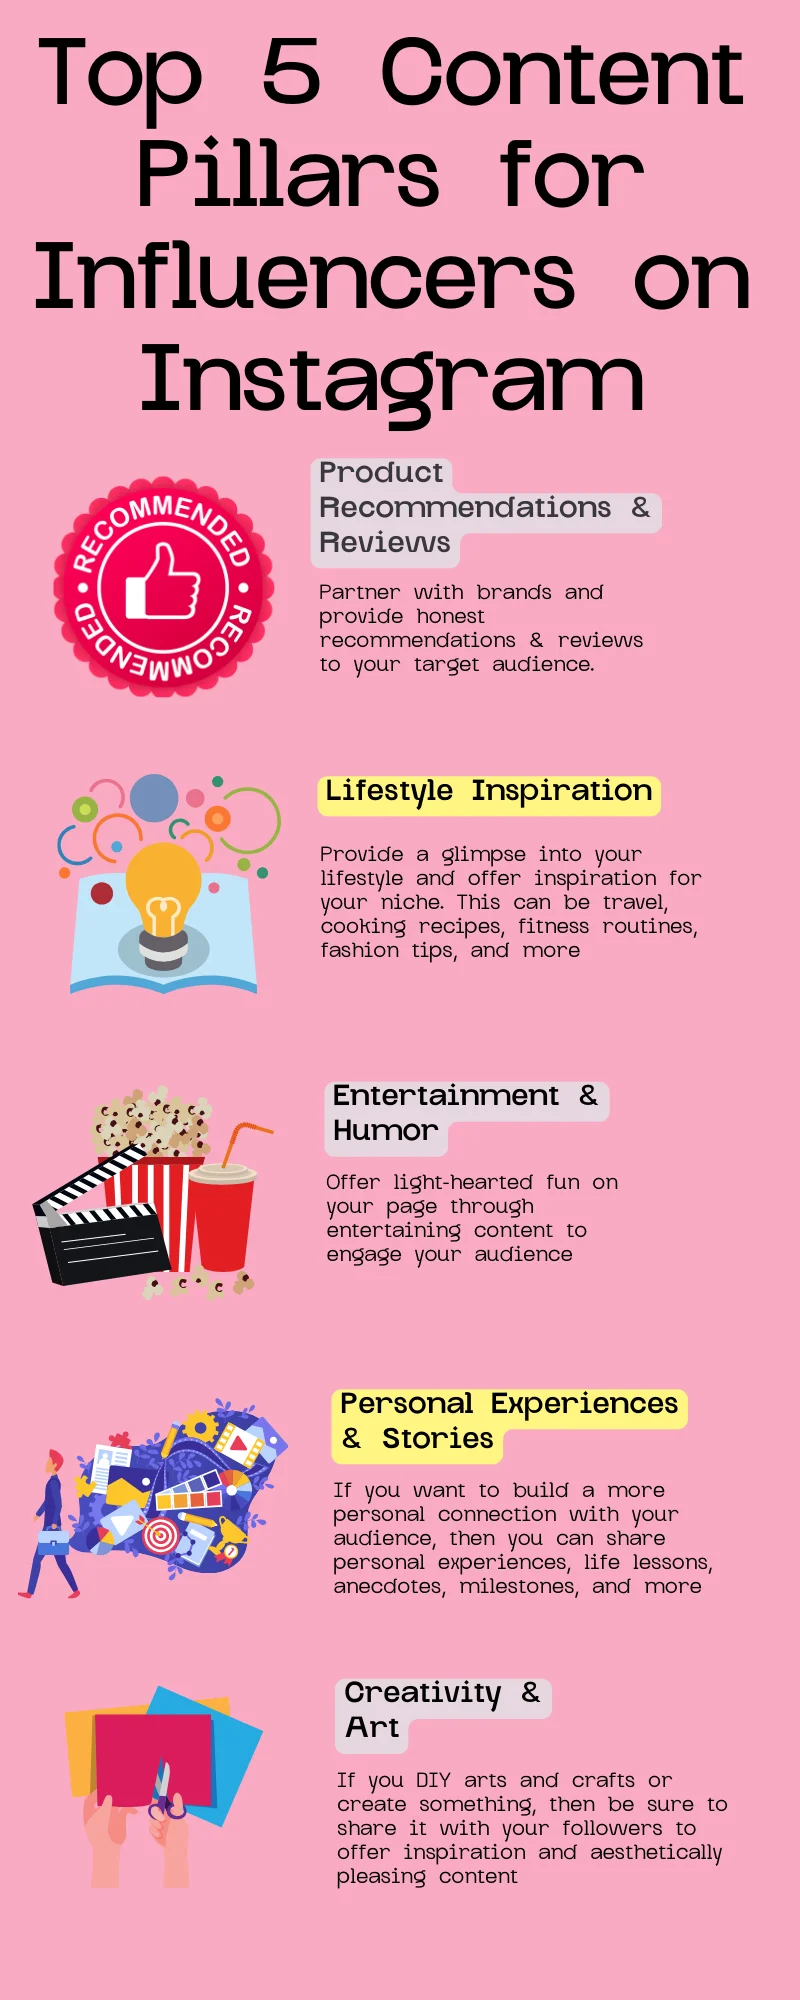 An infographic on content pillars for influencers on Instagram